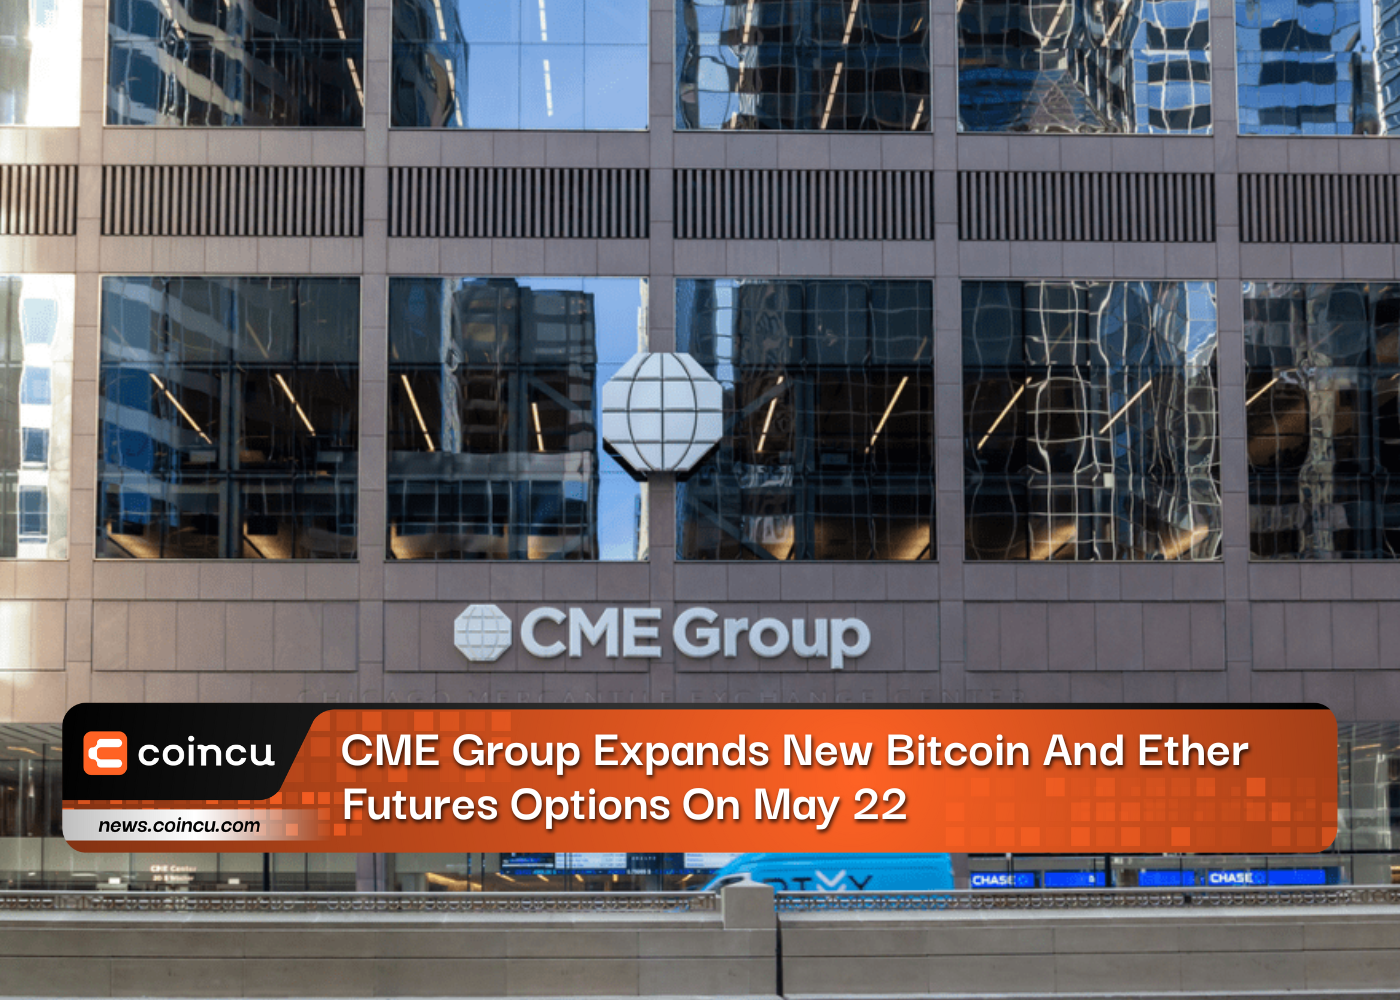 CME Group Expands New Bitcoin And Ether Futures Options On May 22